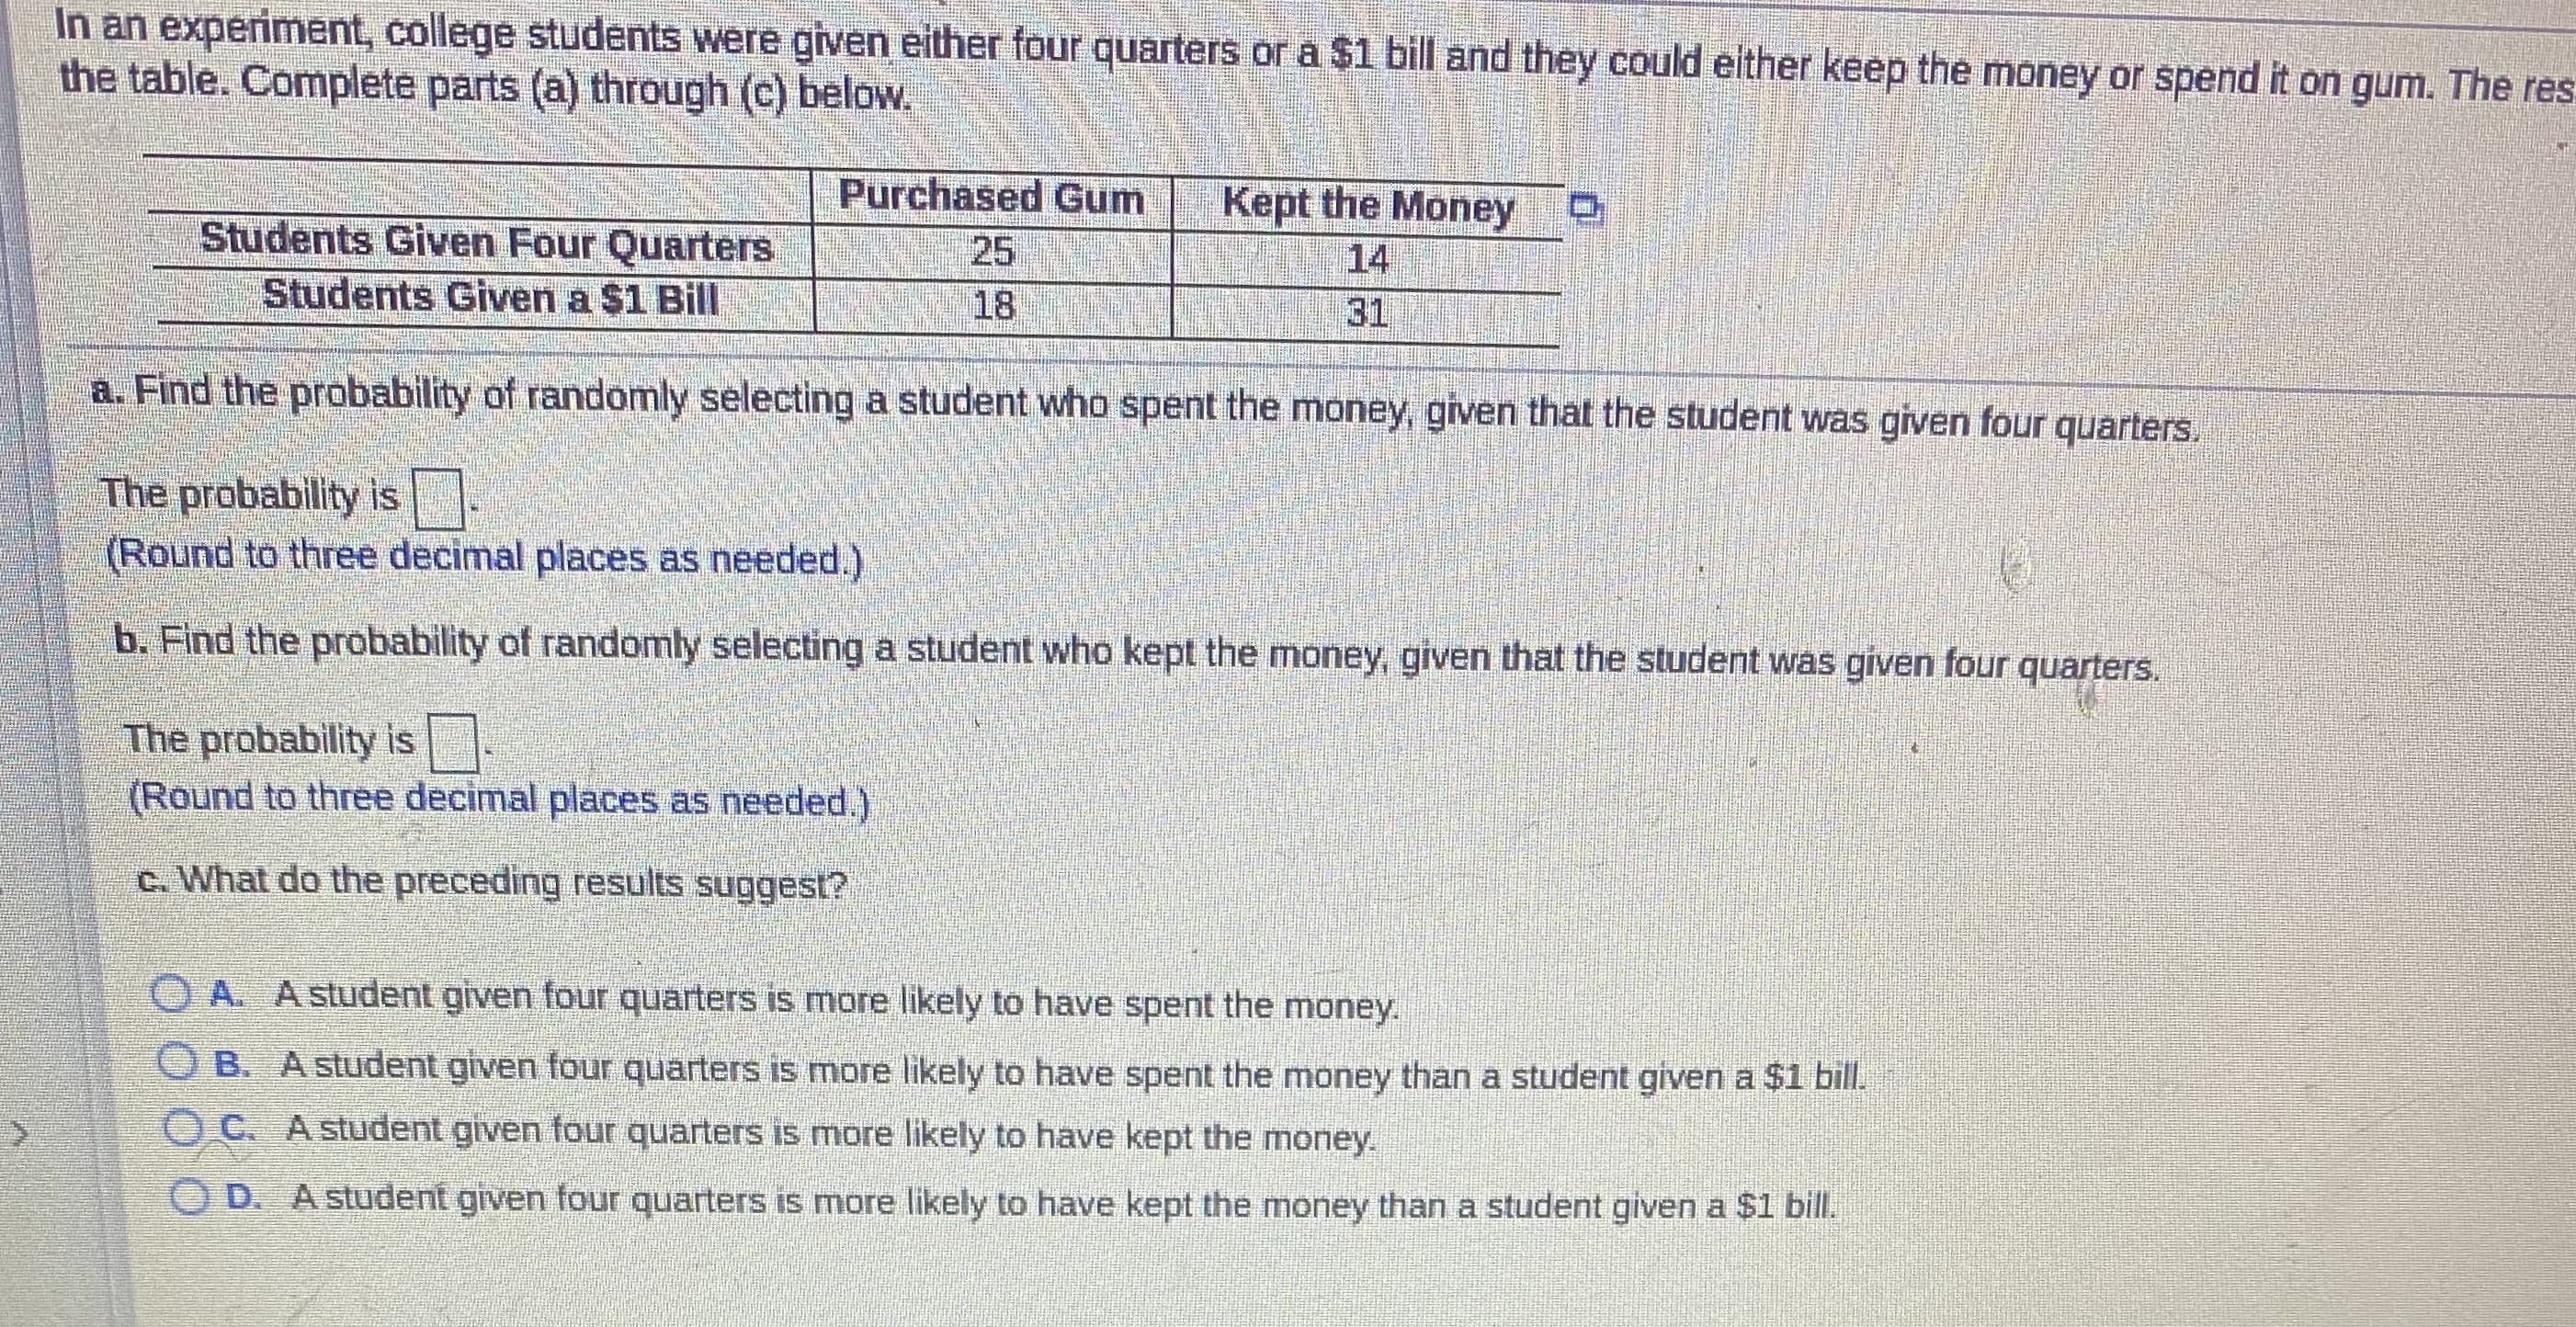 In an experiment, college students were given either four quarters or à $1 bill and they could either keep the money or spend it on gum. The res
the table. Complete parts (a) through (c) below.
Purchased Gum
Students Given Four Quarters
Students Given a $1 Bill
Kept the Money
14
25
18
31
a. Find the probability of randomly selecting a student who spent the money, given that the student was given four quarters.
